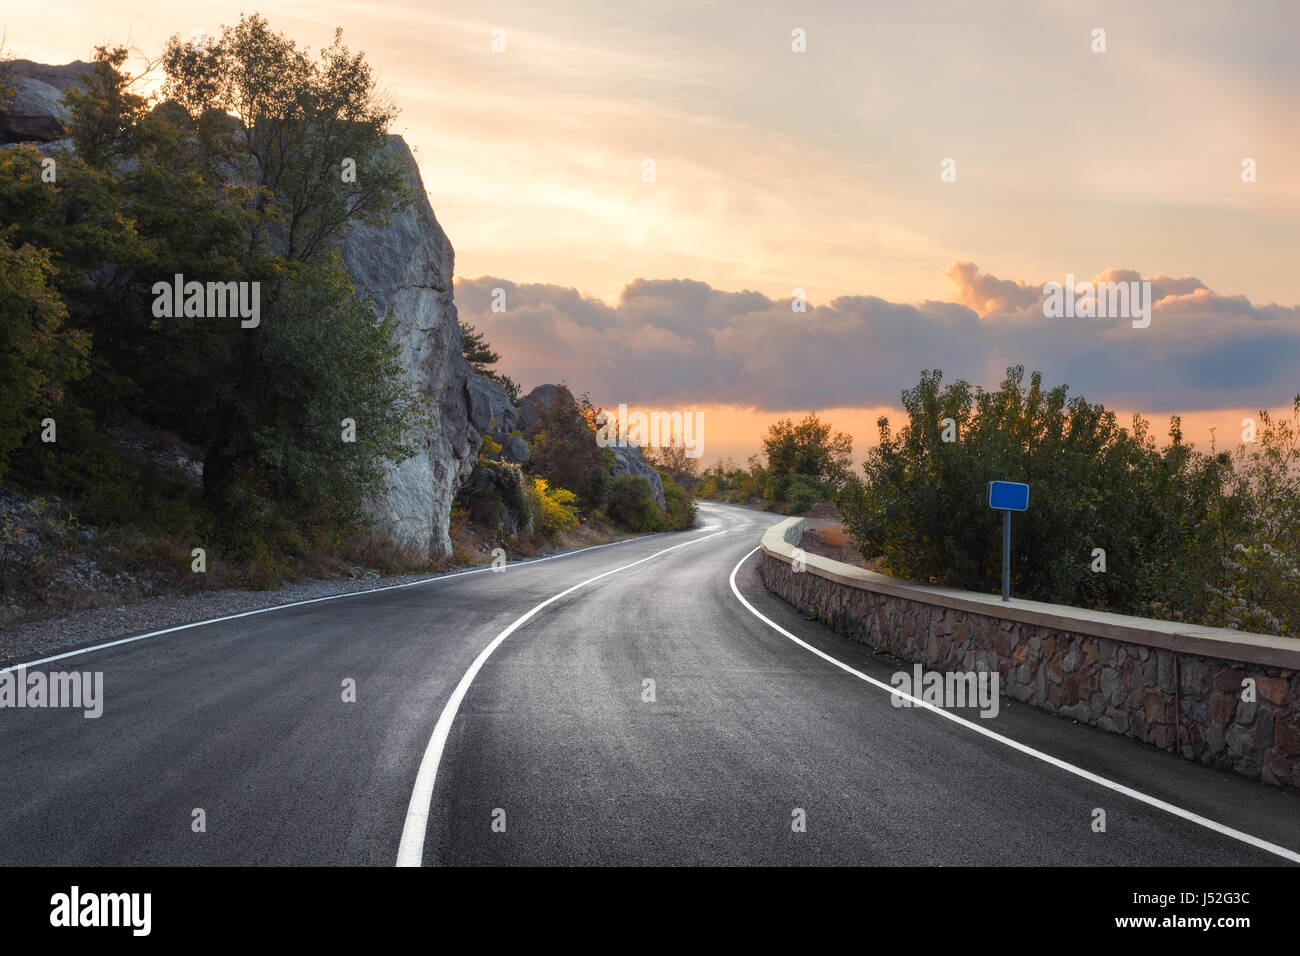 Asphalt road. Landscape with rocks, sunny sky with clouds and beautiful mountain road with a perfect asphalt at sunrise in summer. Vintage toning. Tra Stock Photo